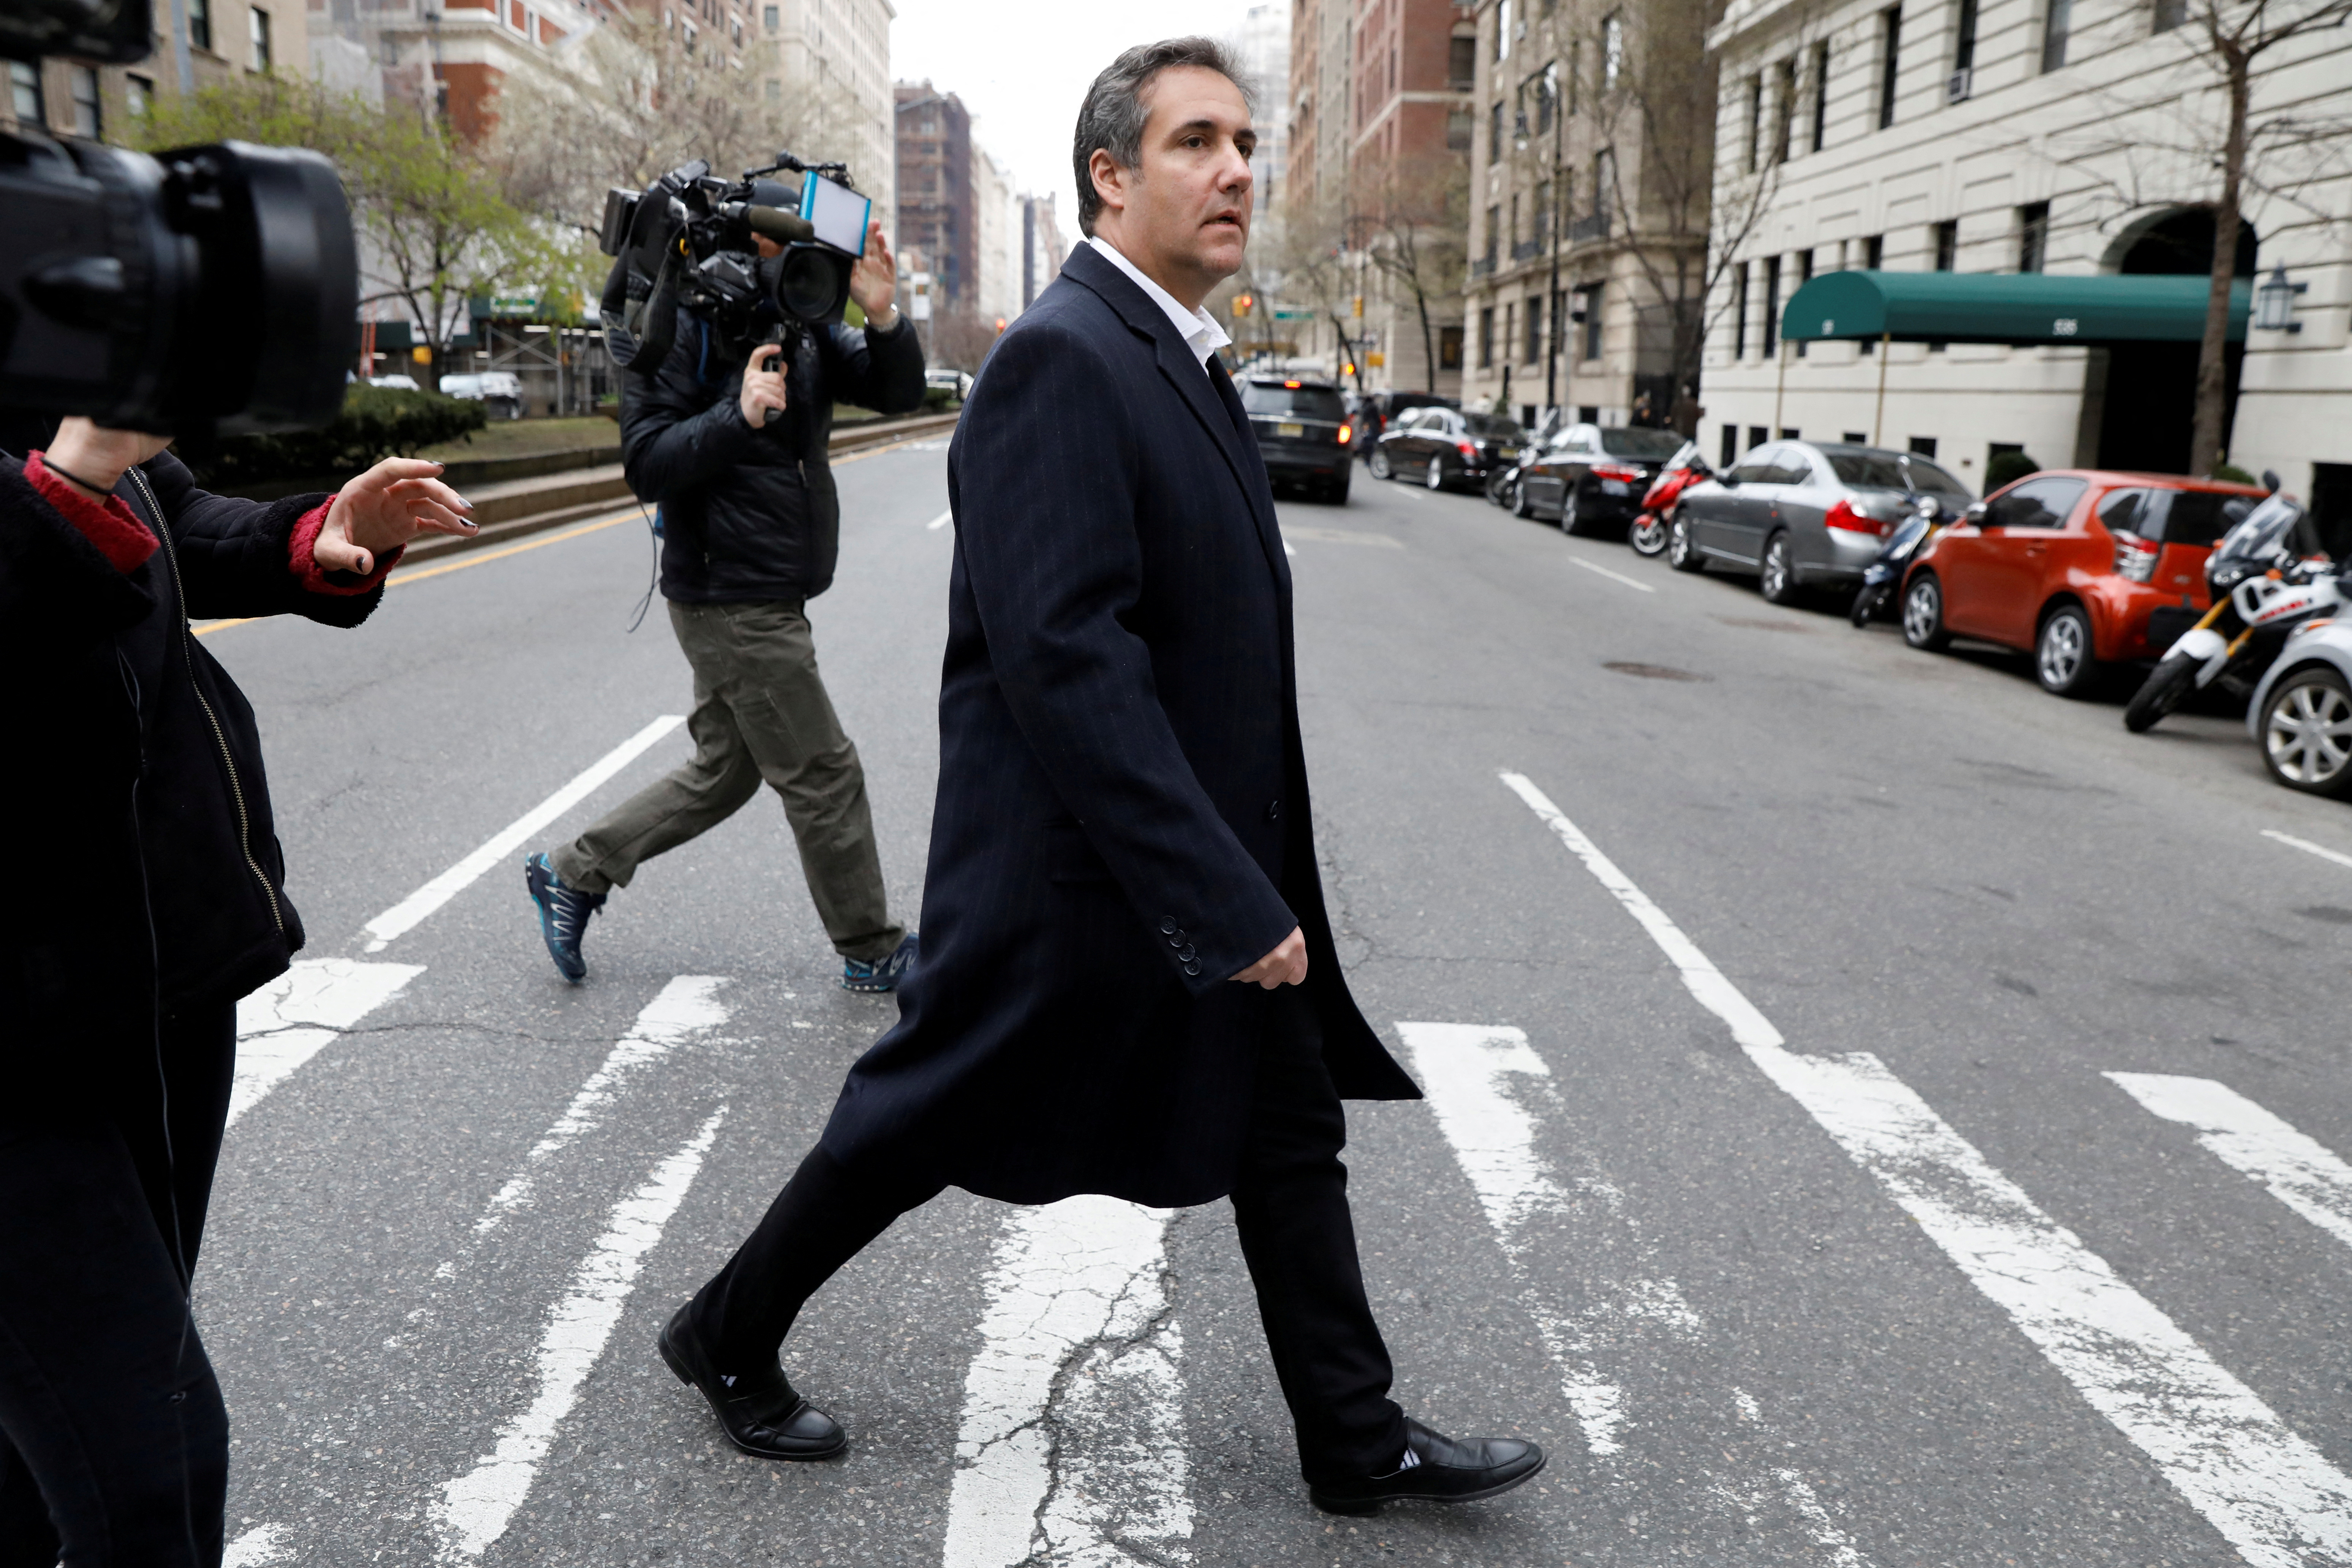 U.S. President Donald Trump's personal lawyer Michael Cohen exits a hotel in New York